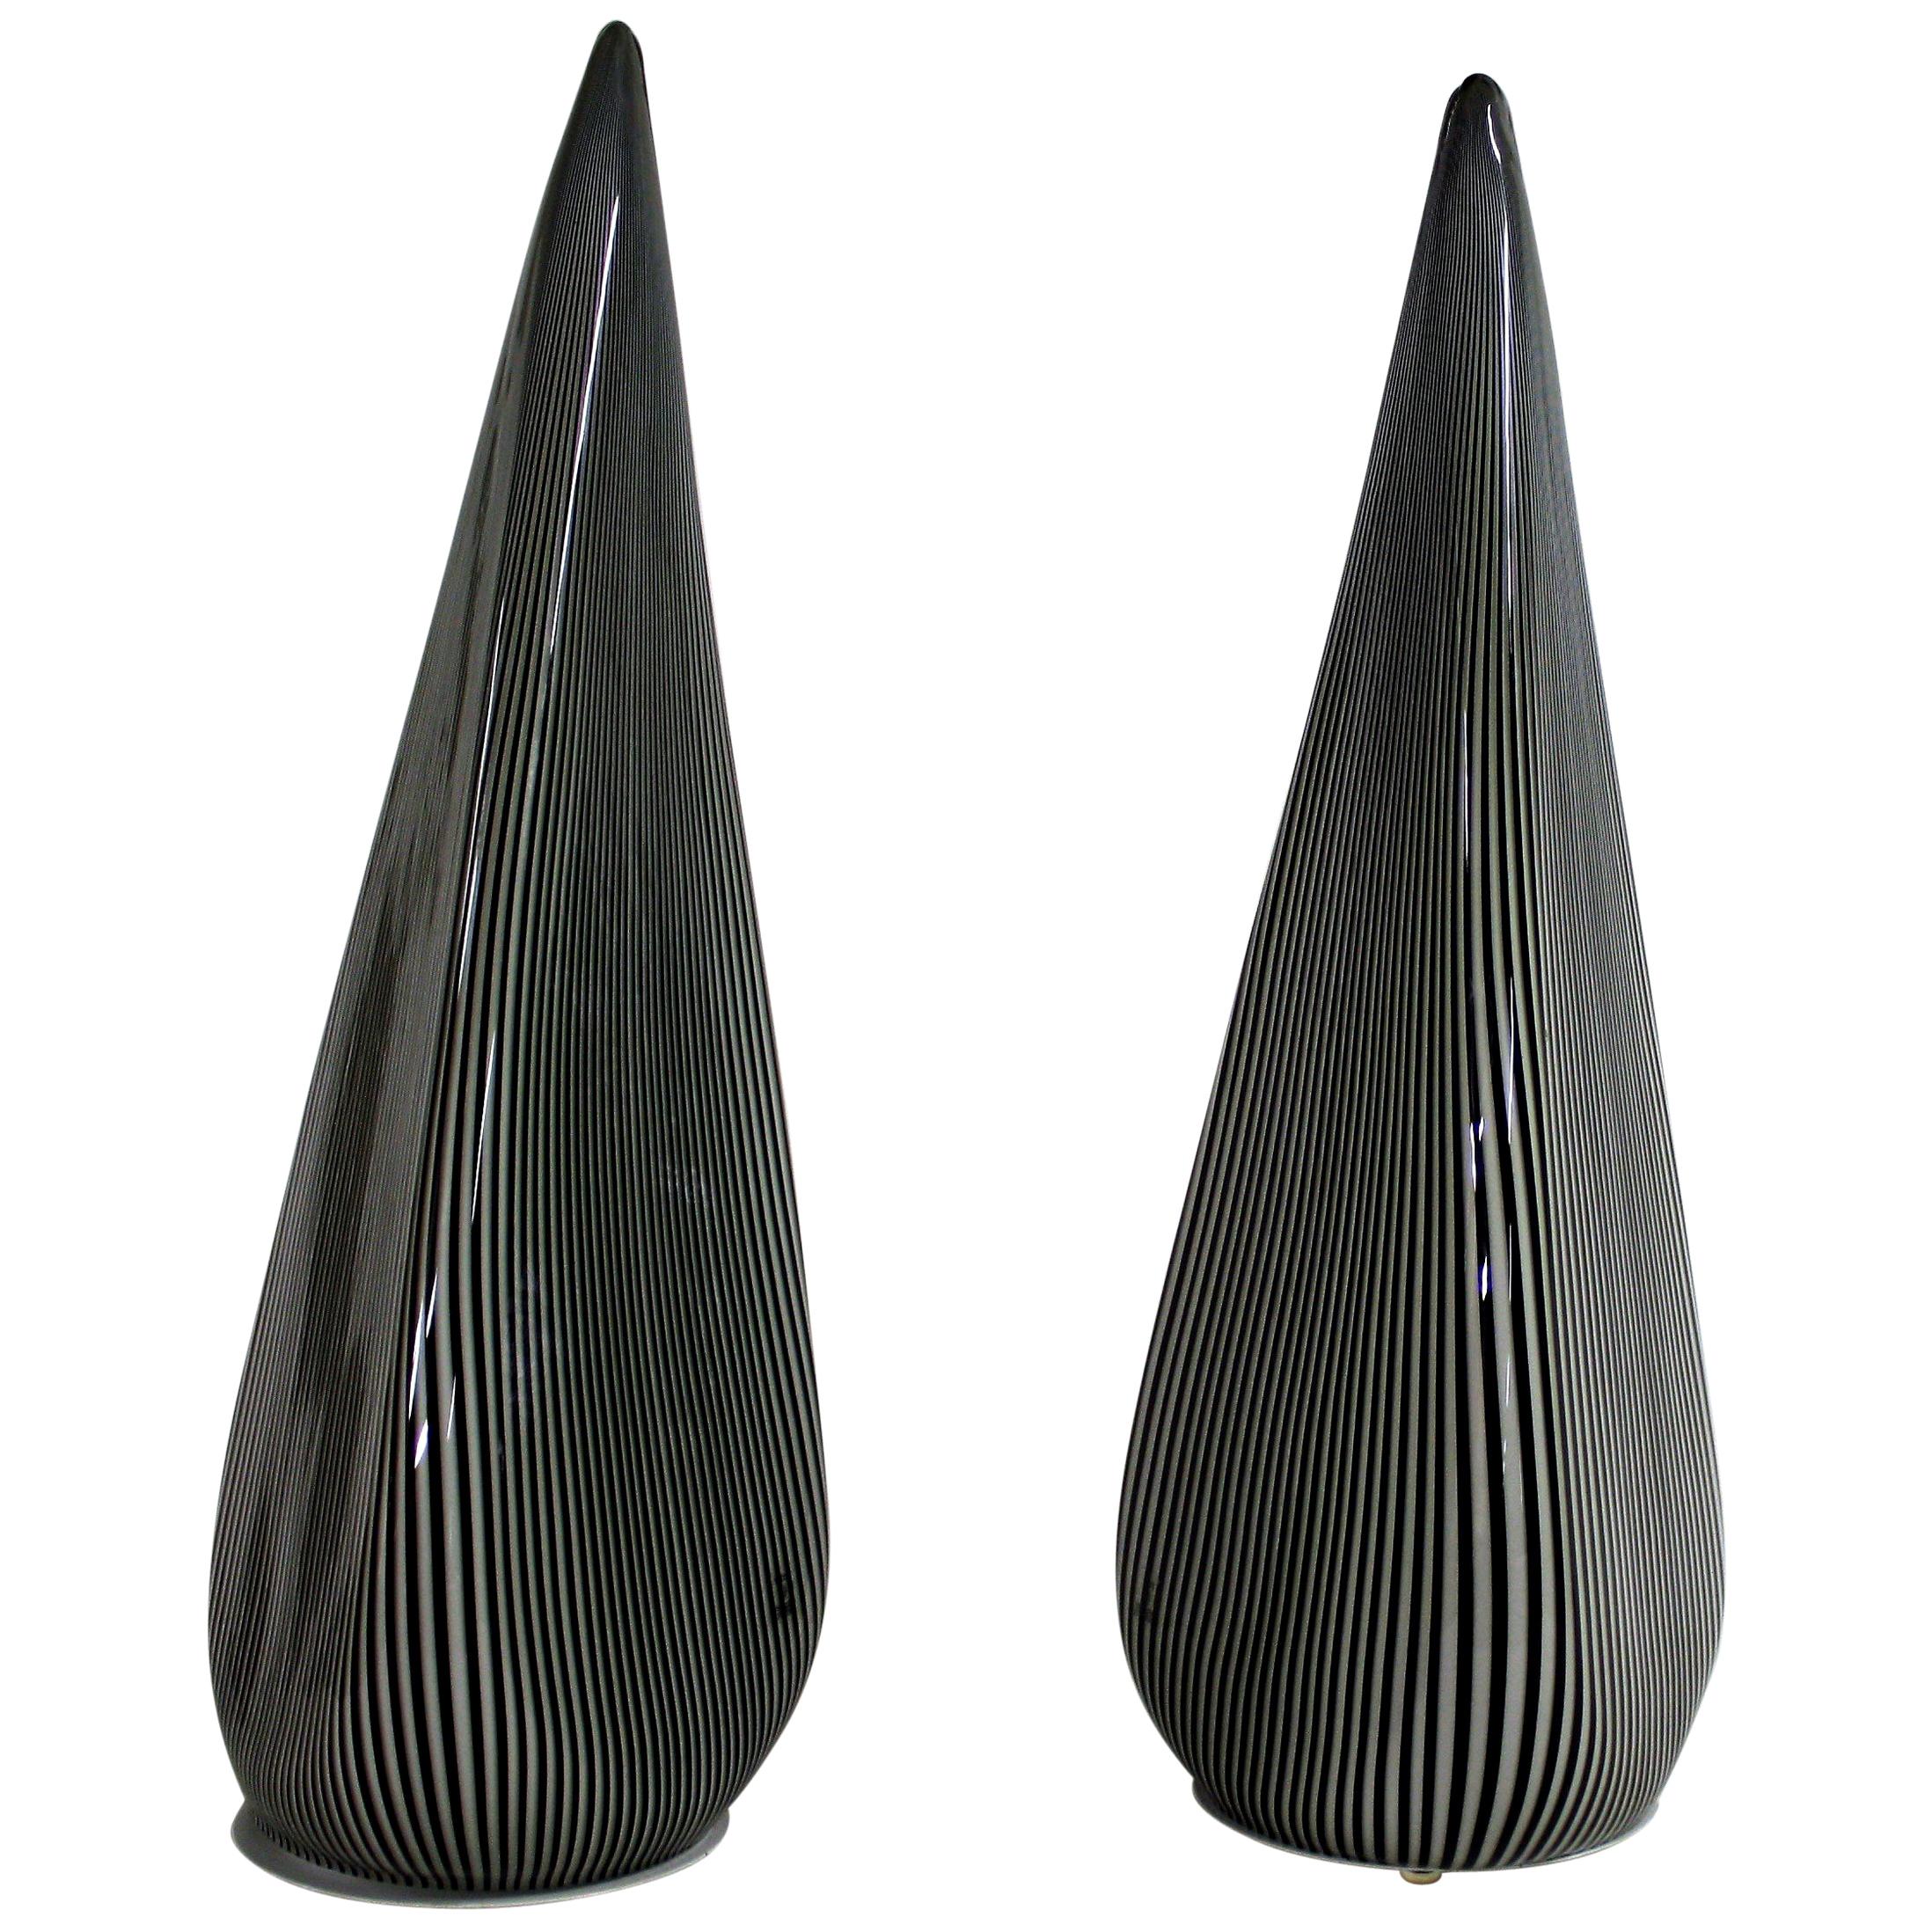 Pair of Large Murano Pyramid Lamps by Vetri, 1970s